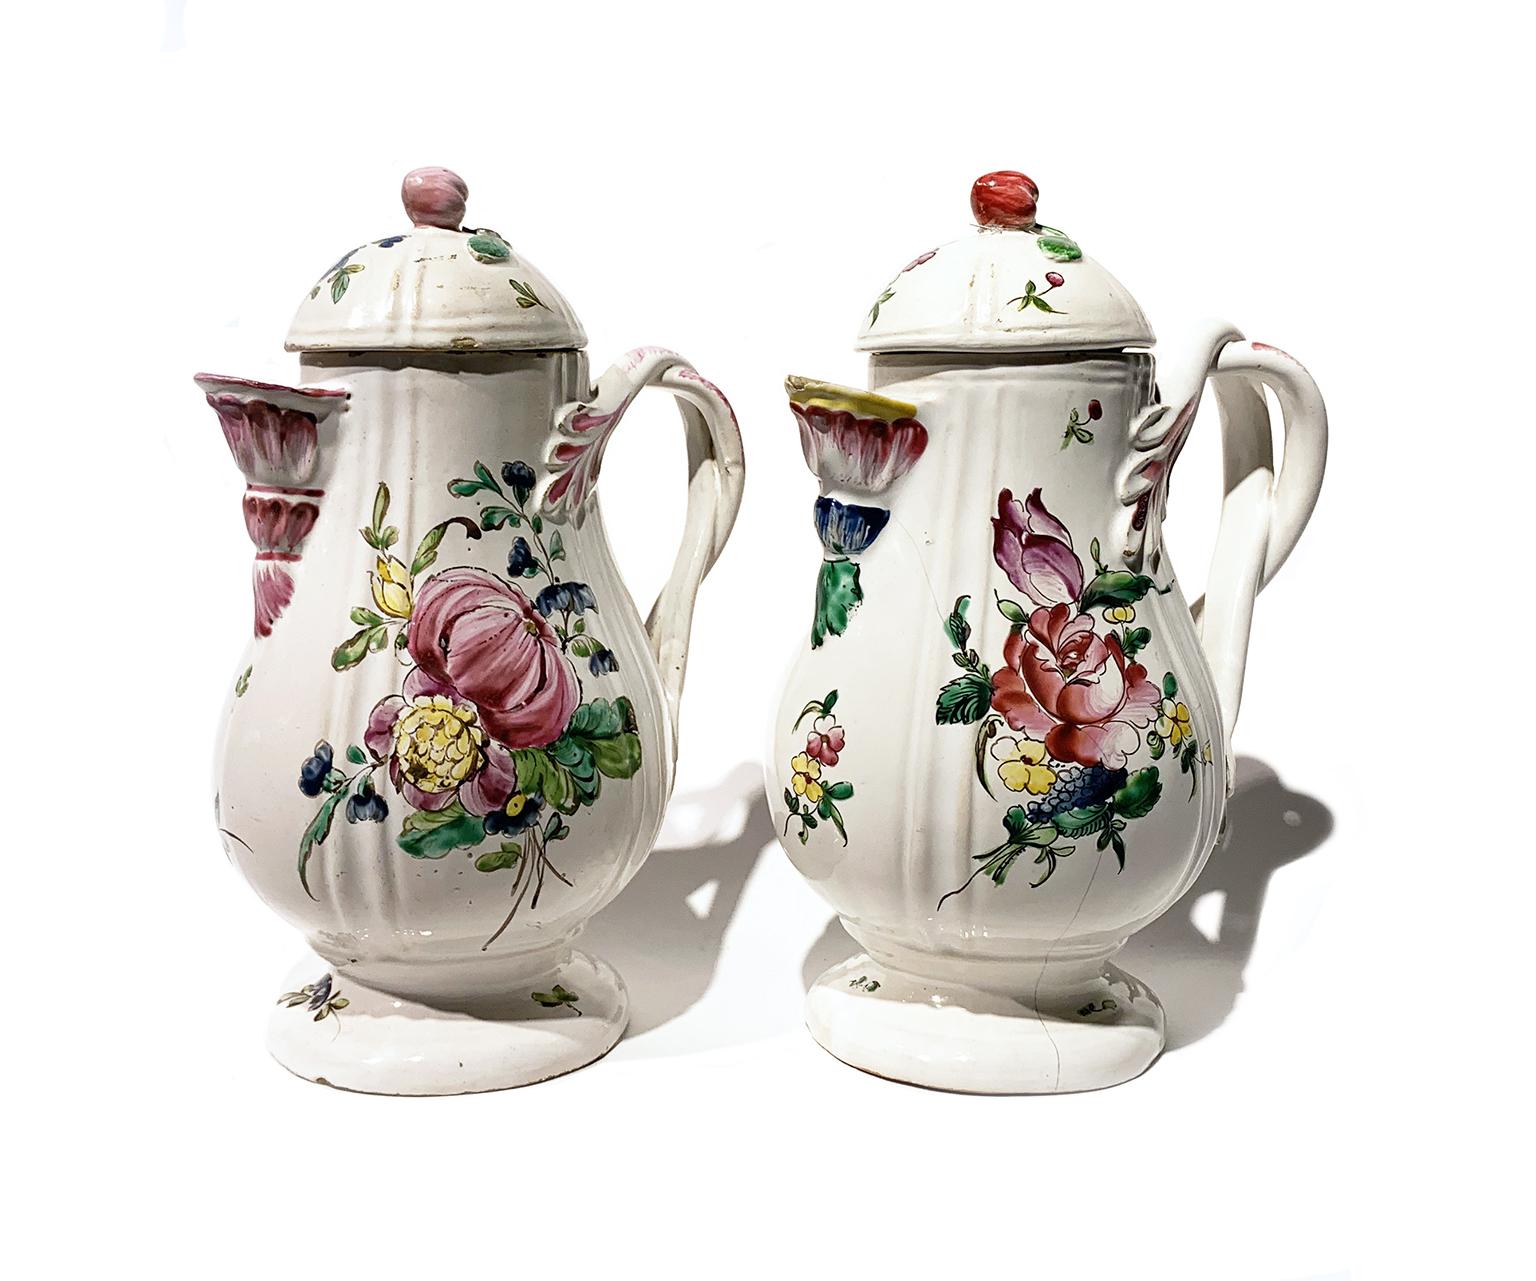 Pair of small coffee pots.
Manufacture of Pasquale Rubati 
Milan, 1770 Circa
Maiolica polychrome decorated “a piccolo fuoco” (third fire).
a) height 7.87 x 5.51 x 3.93 in (20 x 14 x 10 cm); weight 0.74 lb (339 g)
b) height 7.08 x 5.51 x 3.93 in (18